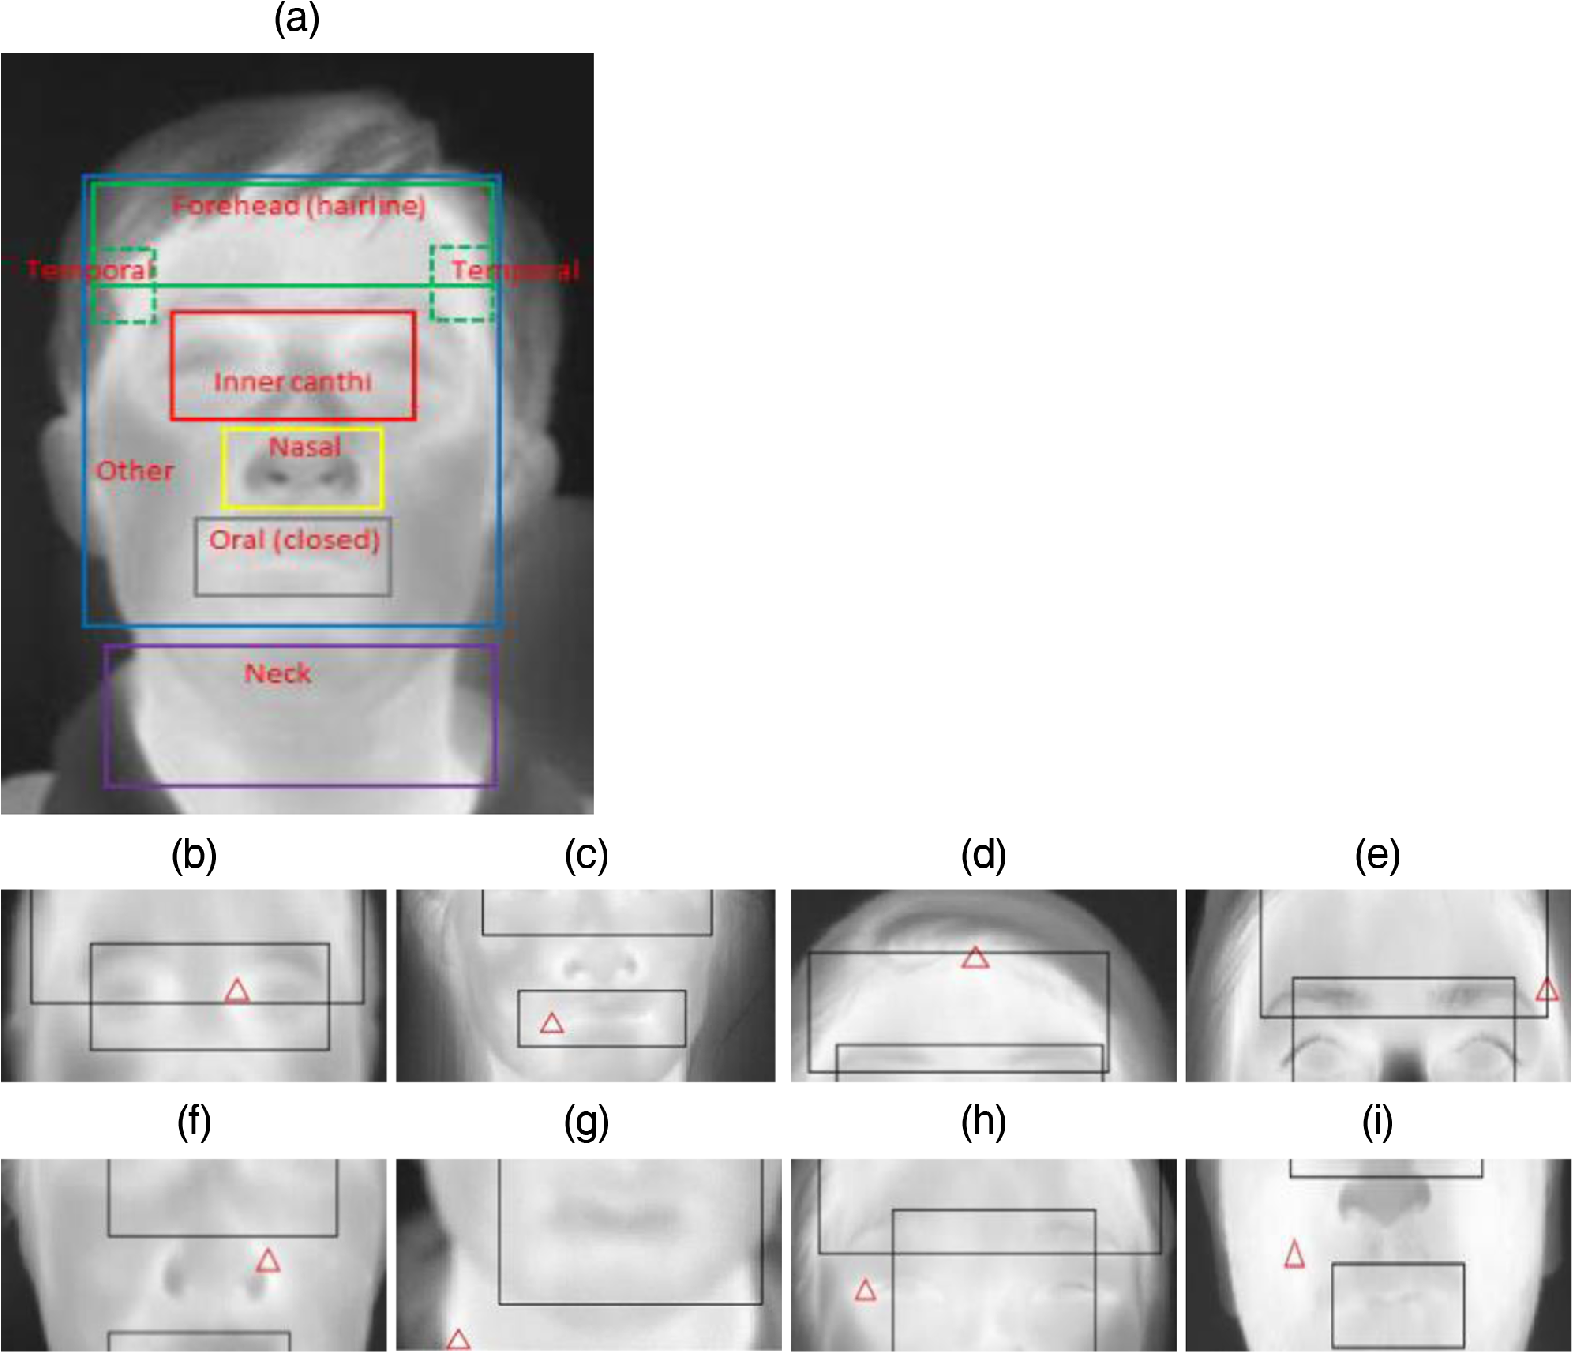 Clinical Evaluation Of Fever Screening Thermography Impact Of Consensus Guidelines And Facial Measurement Location